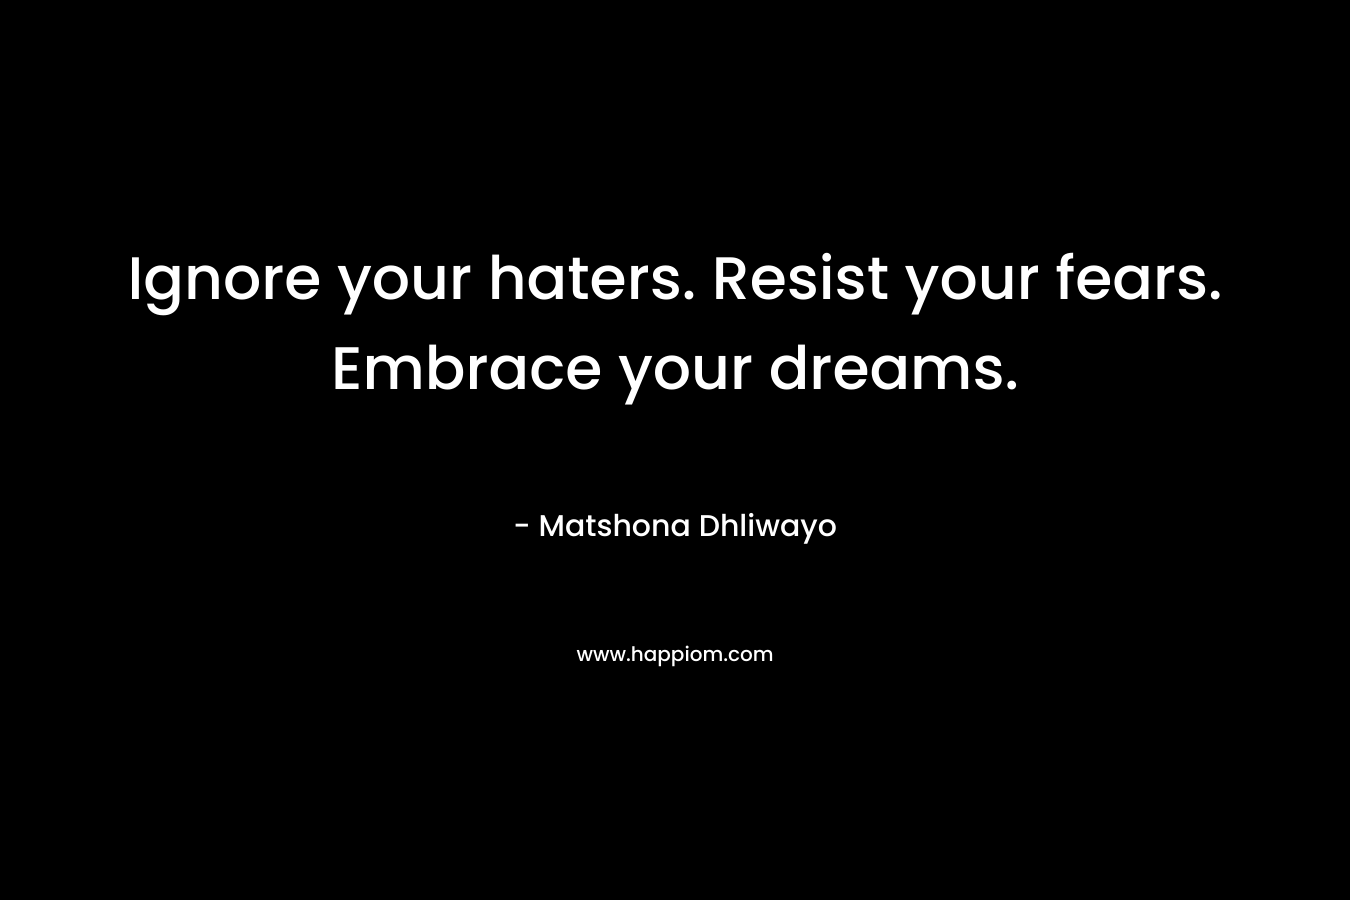 Ignore your haters. Resist your fears. Embrace your dreams.